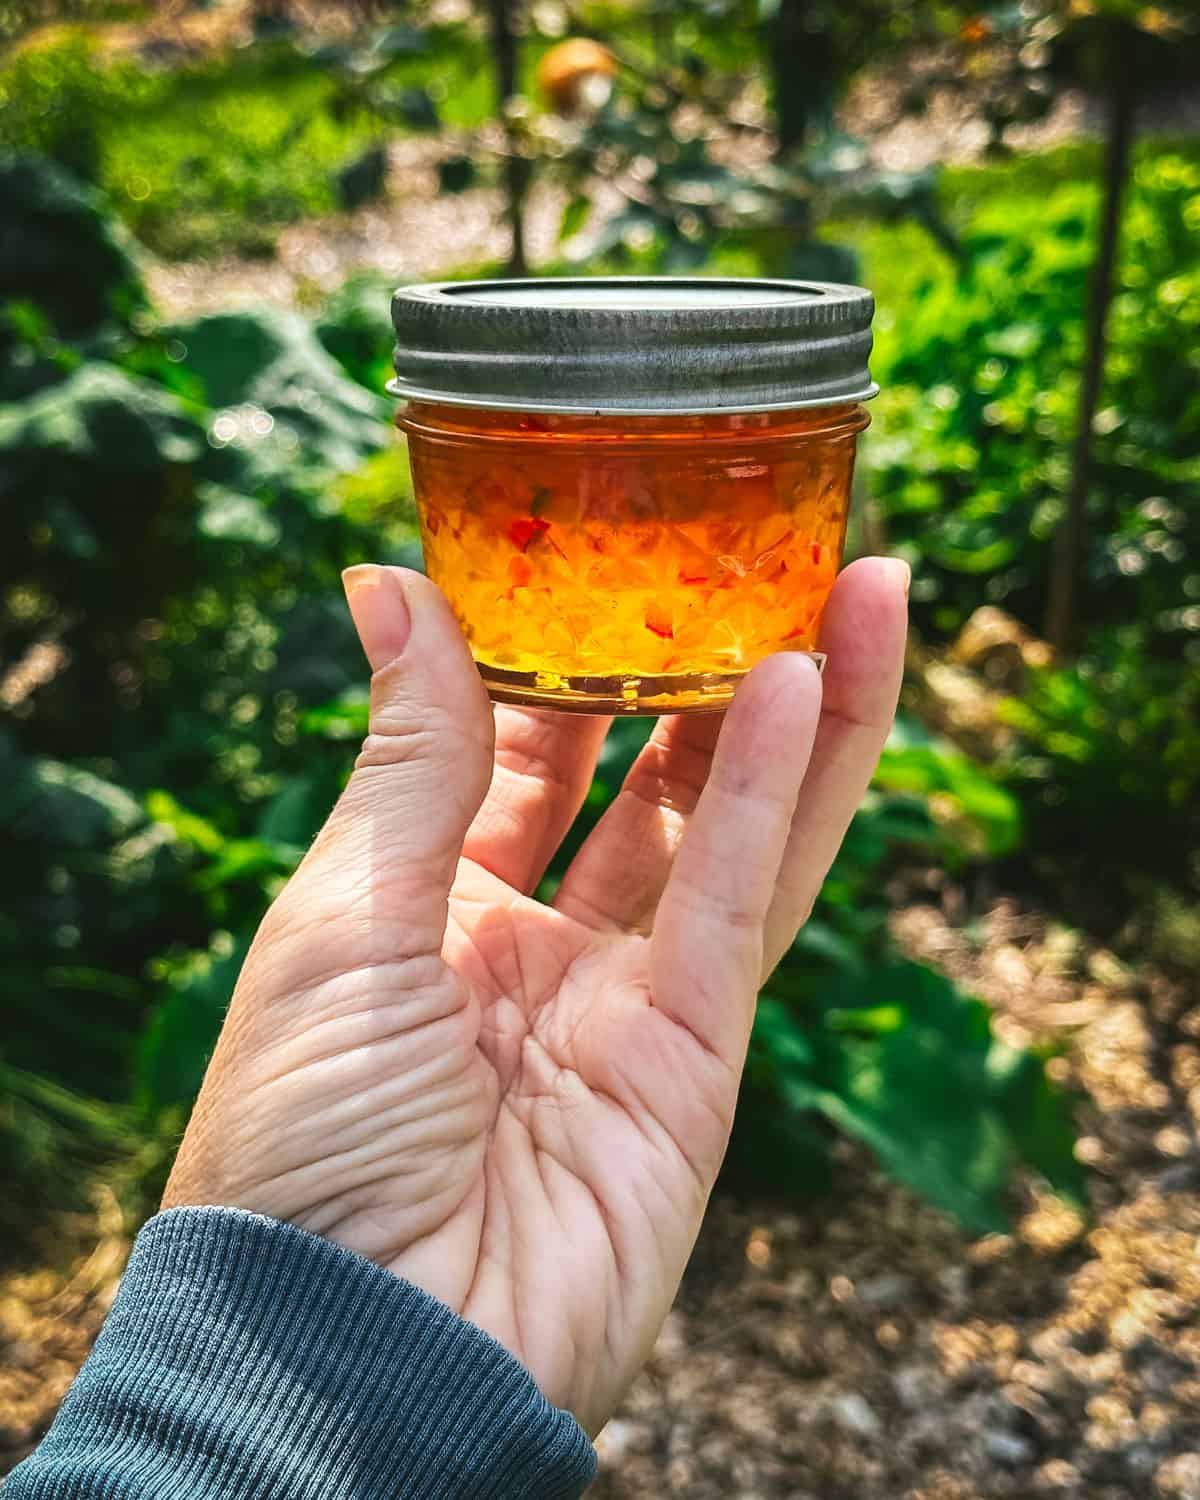 A jar of pepper jelly being held up by a hand outside with greenery in the background. 